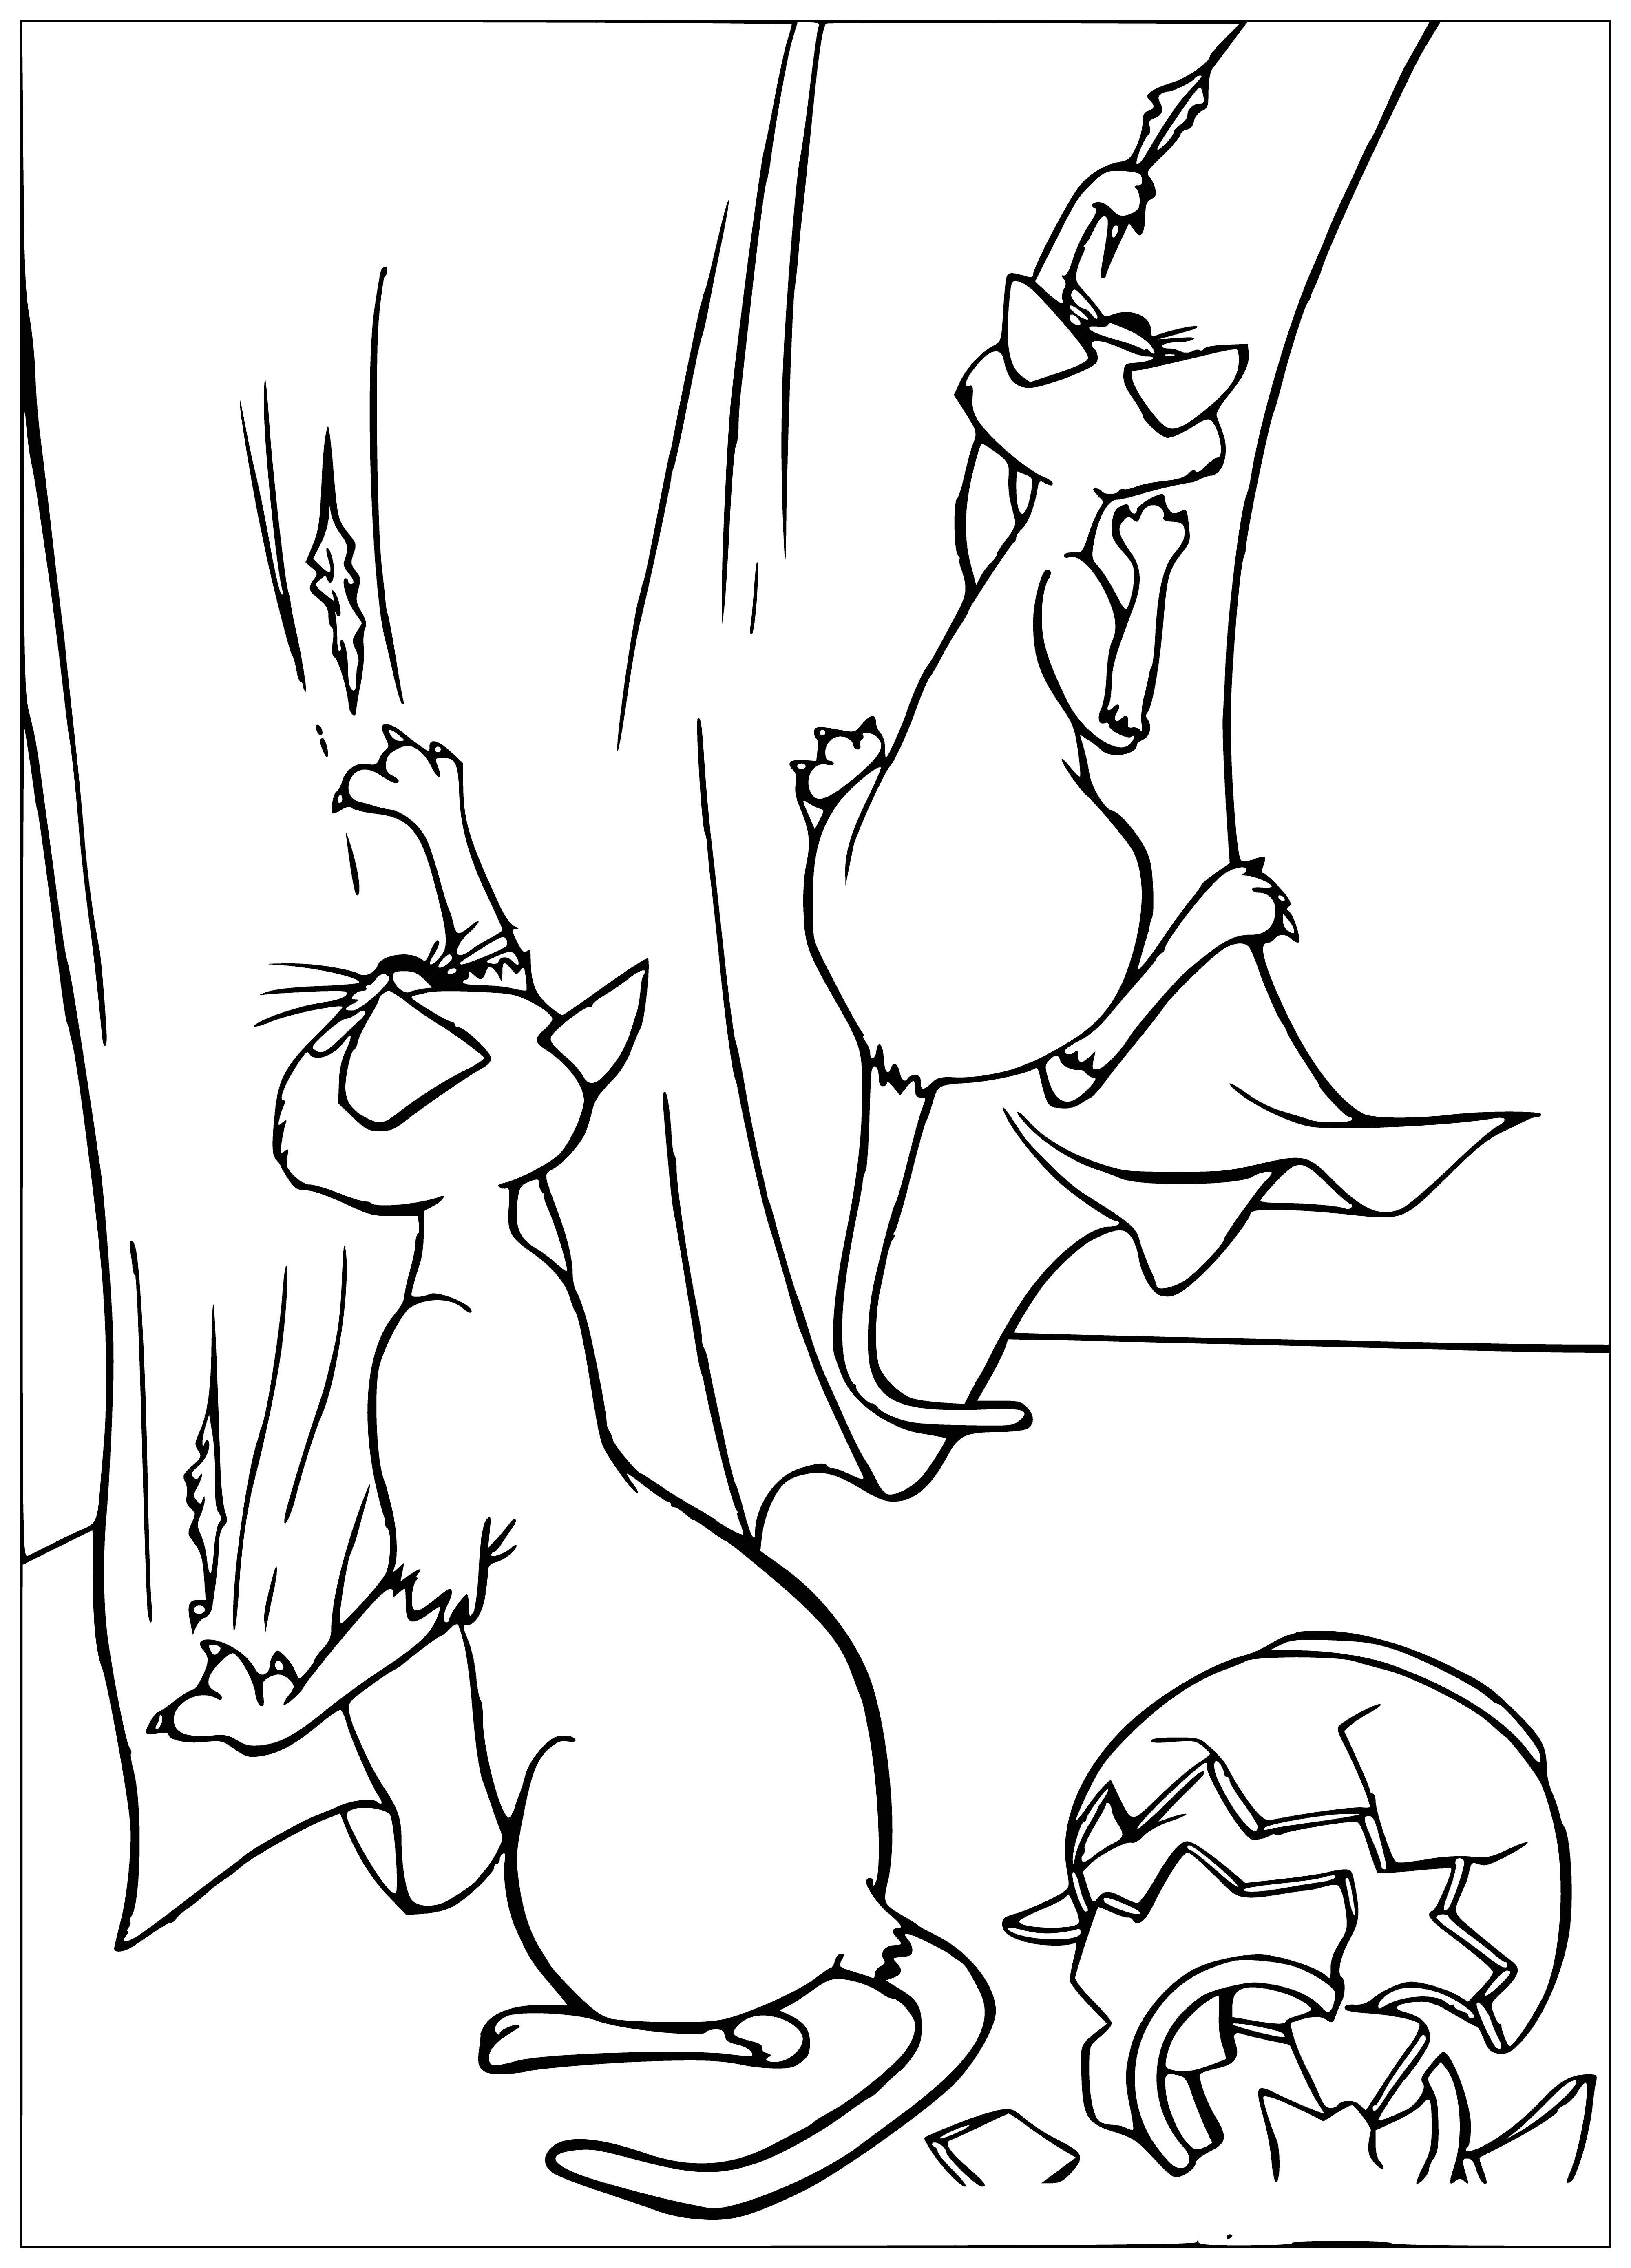 Ugly cats coloring page